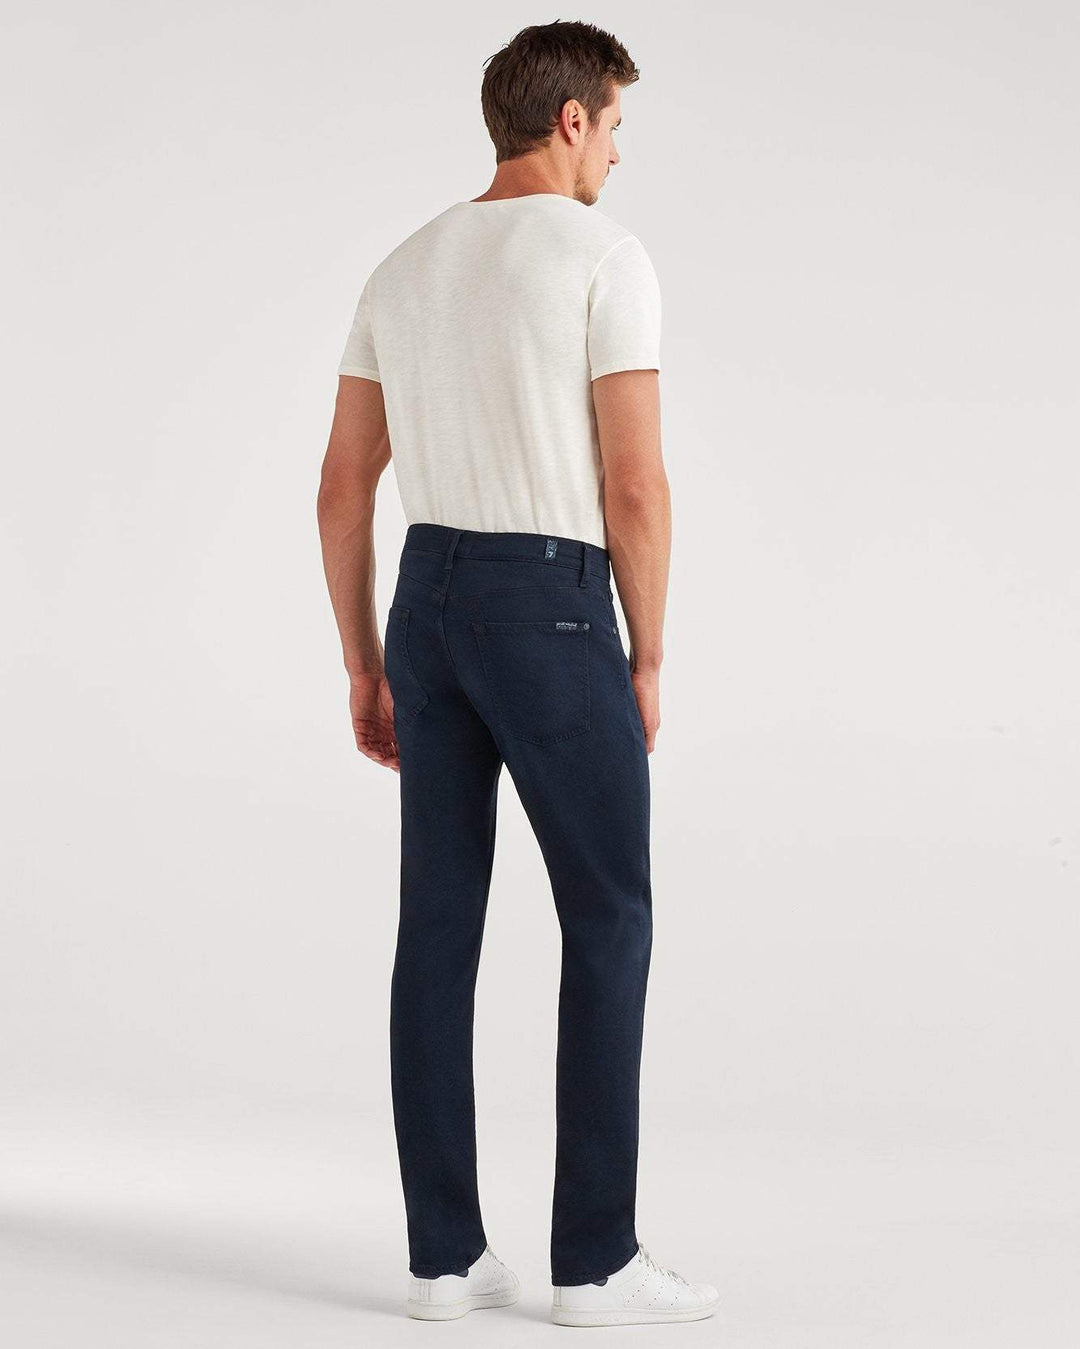 7 For All Mankind Luxe Sport Slimmy Pant